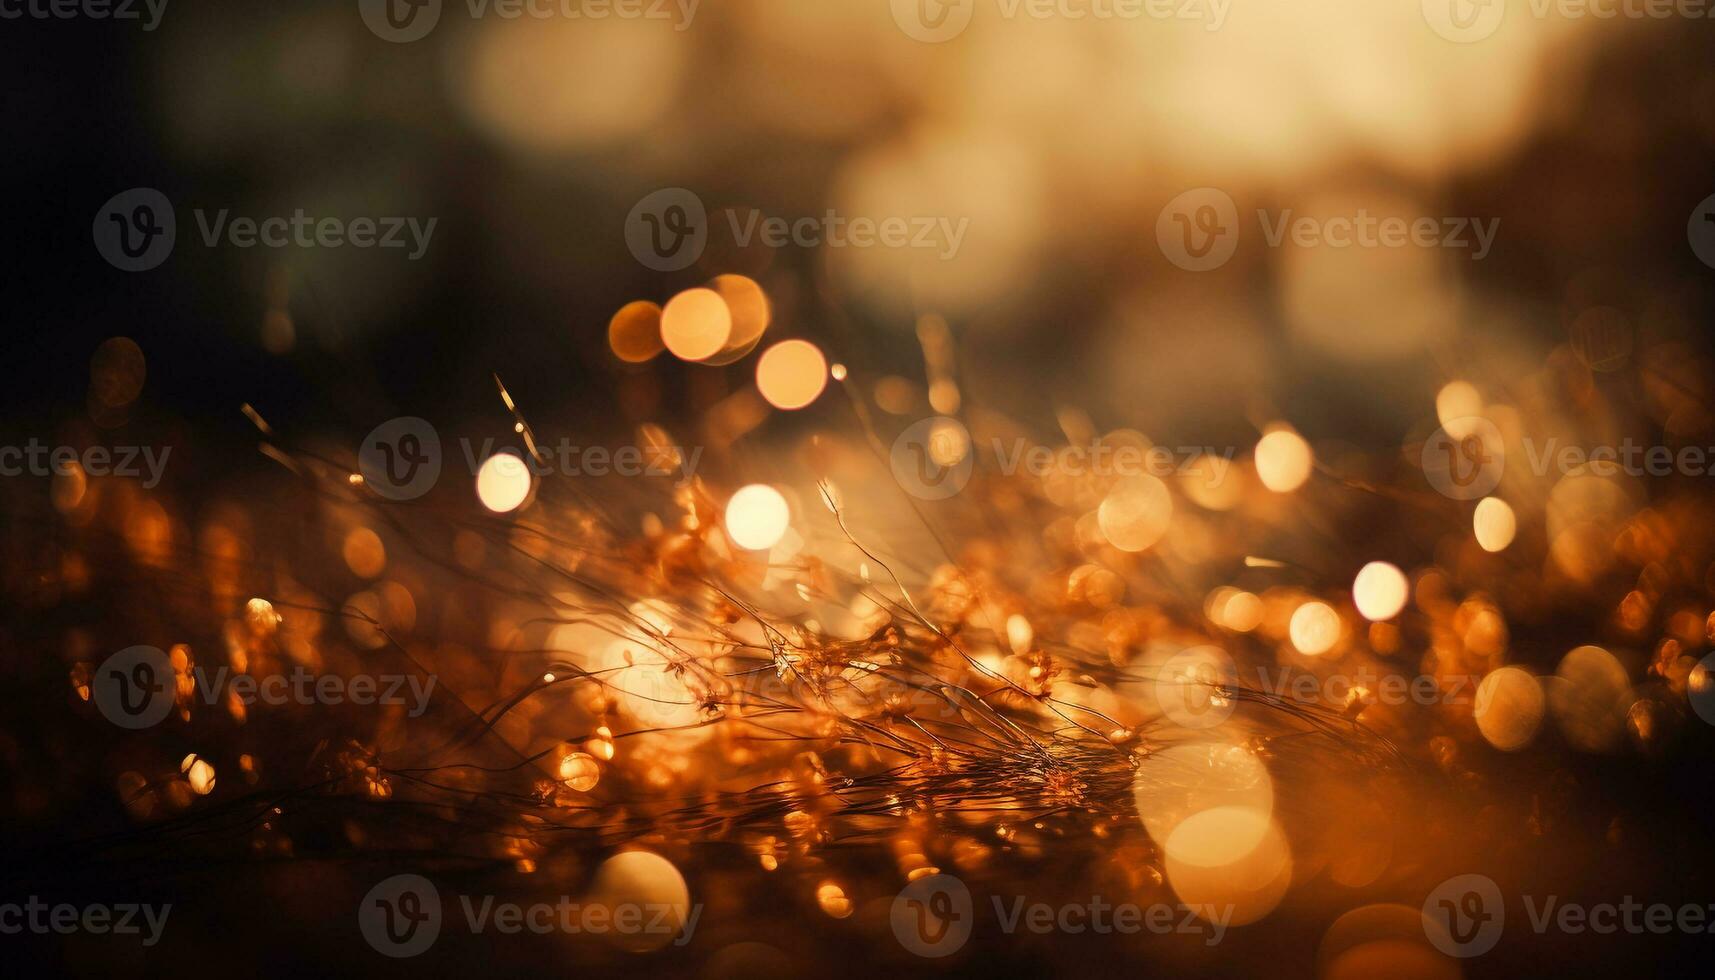 Shiny, glowing Christmas lights illuminate the defocused winter backdrop generated by AI photo